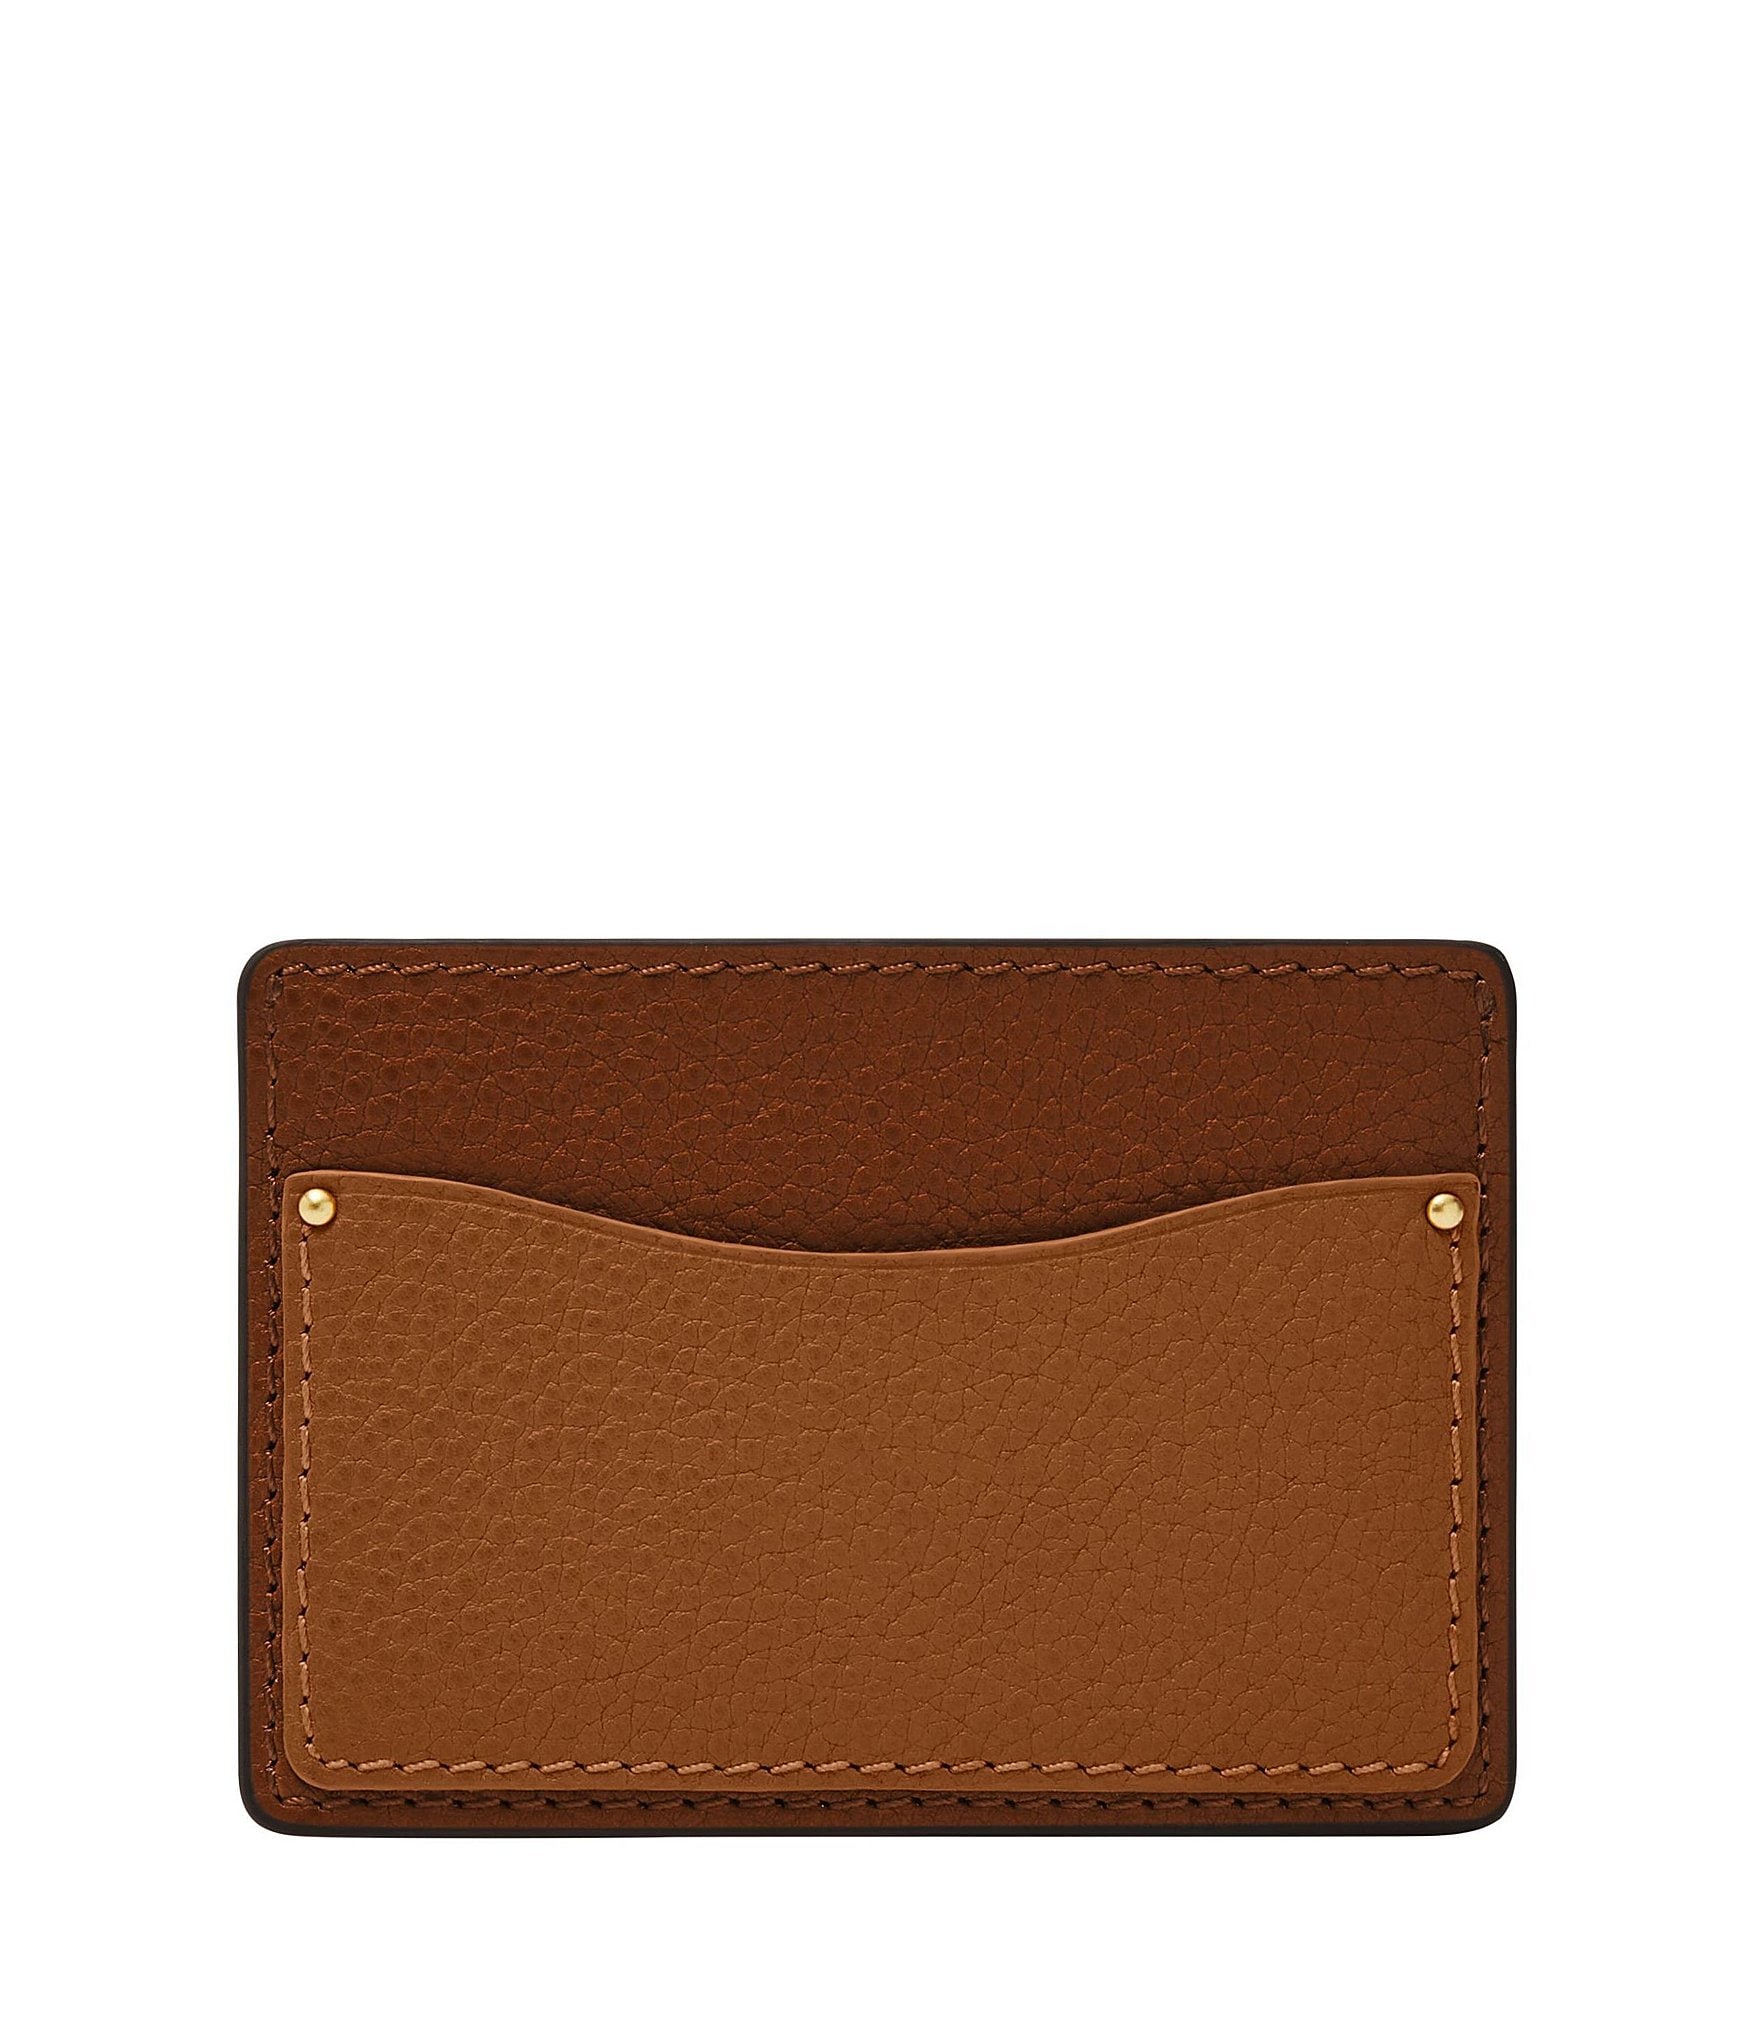 Fossil Anderson Leather Card Case | Dillard's